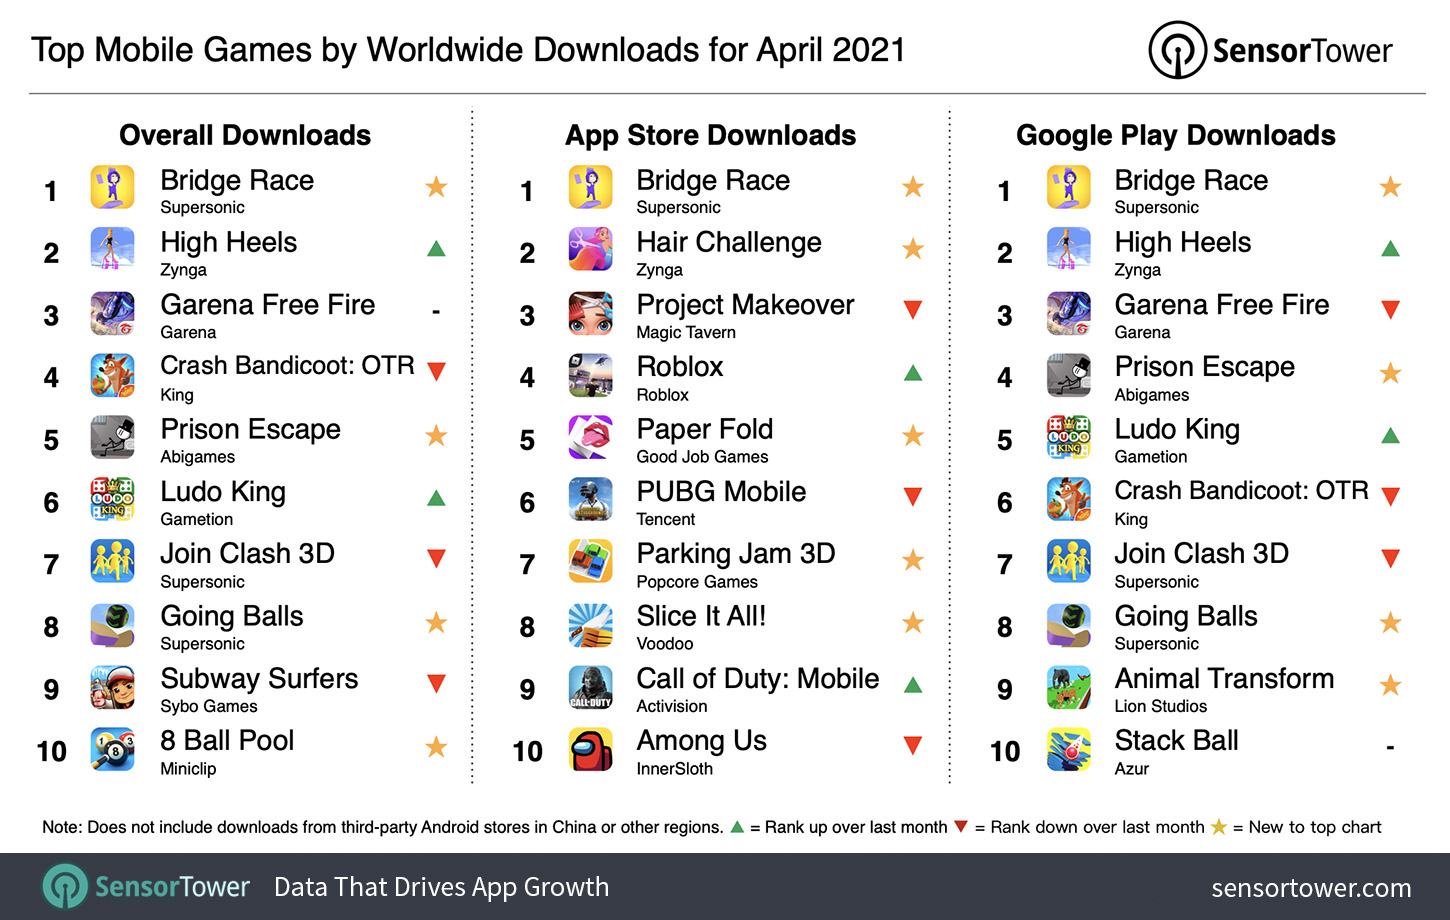 Top Mobile Games Worldwide for April 2021 by Downloads